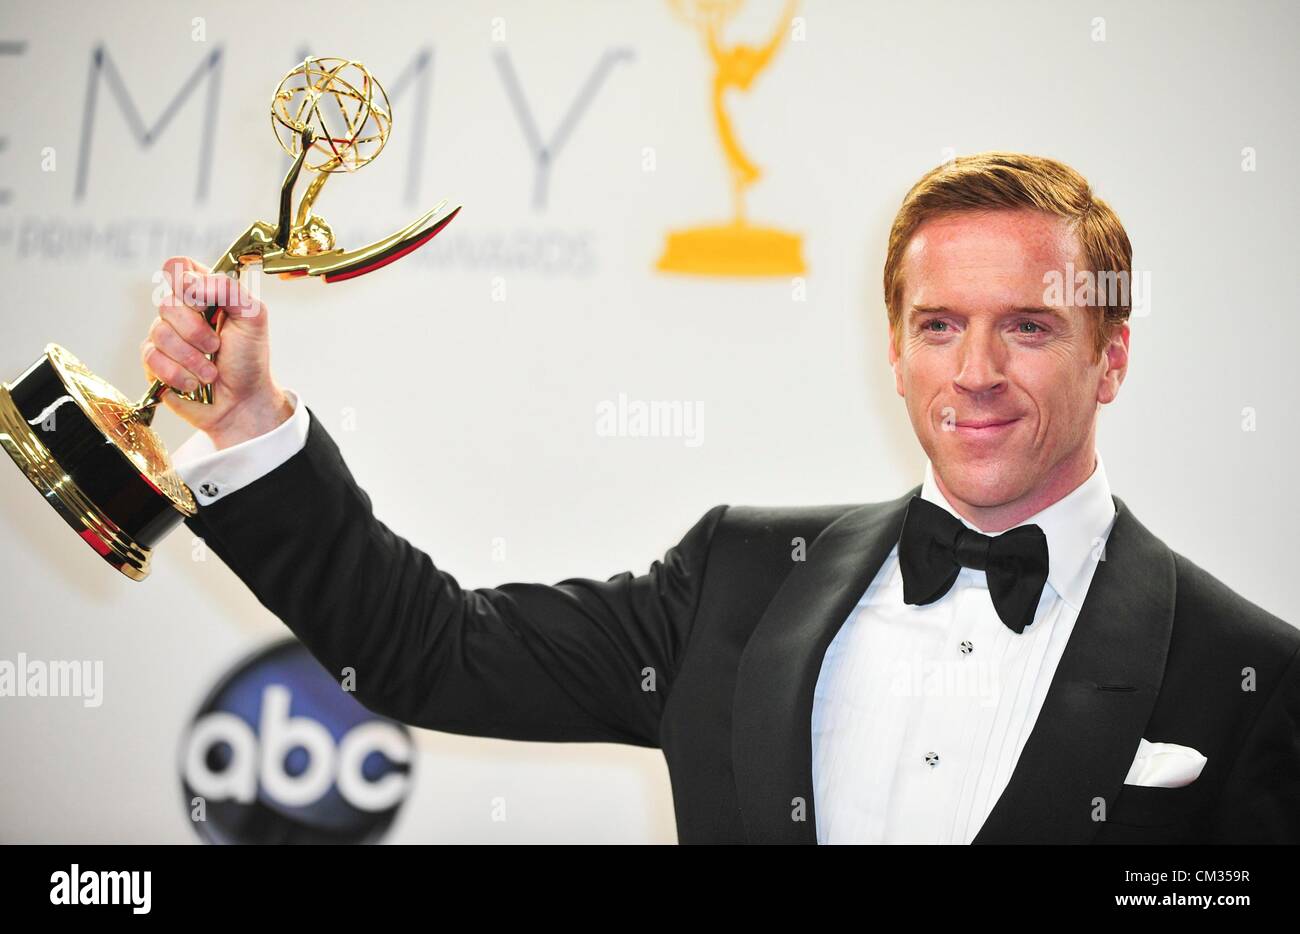 Damian Lewis inpress room64th Primetime Emmy Awards - PRESS ROOM Nokia Theatre L.A LIVE Los Angeles CA September 23 2012 Photo Stock Photo